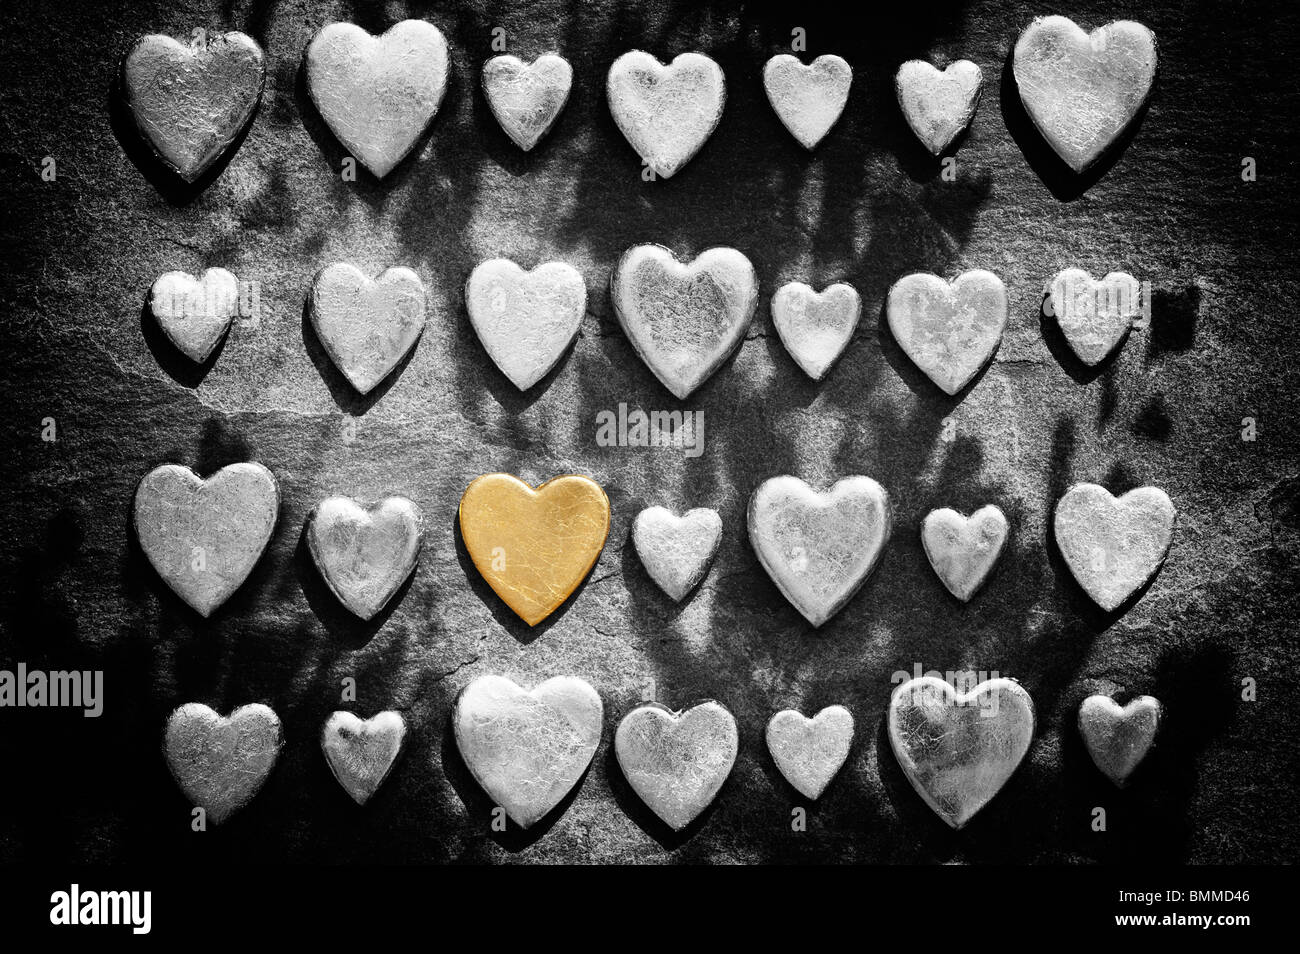 Gold heart shape against slate background with monochrome hearts in light and shade Stock Photo